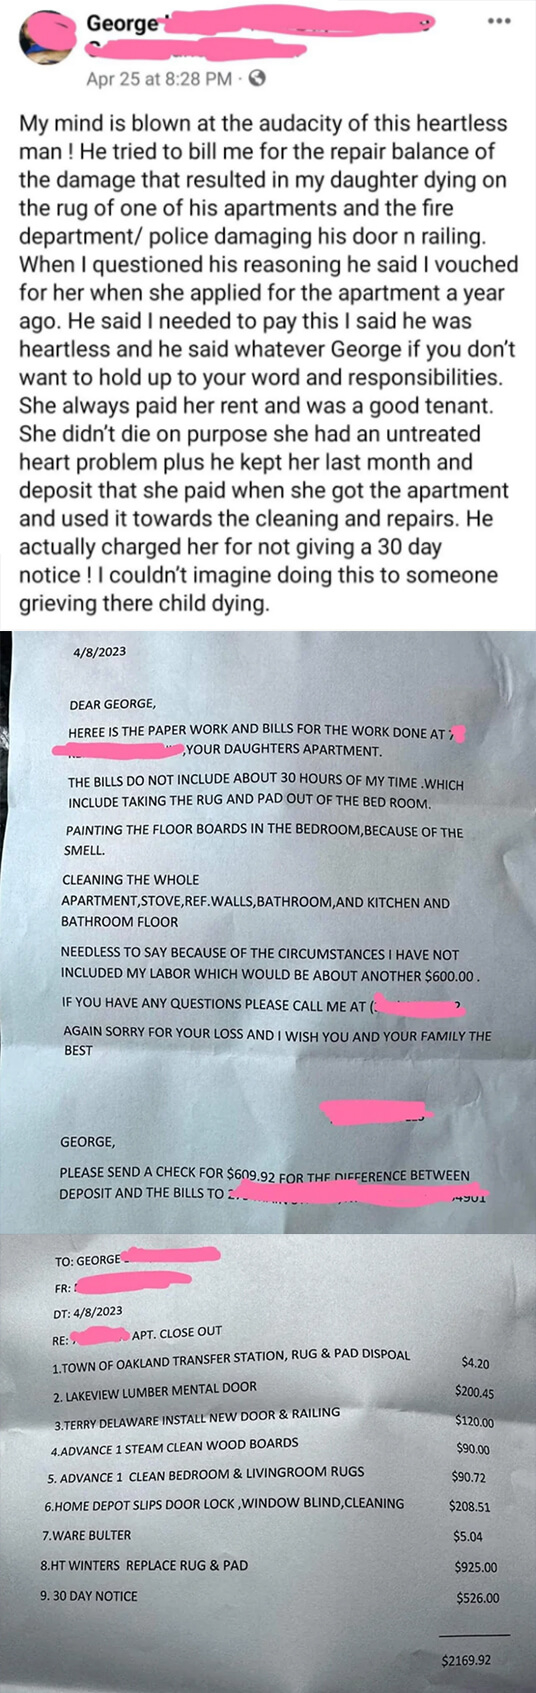 note of the landlord charging over $2000 to the grieving dad